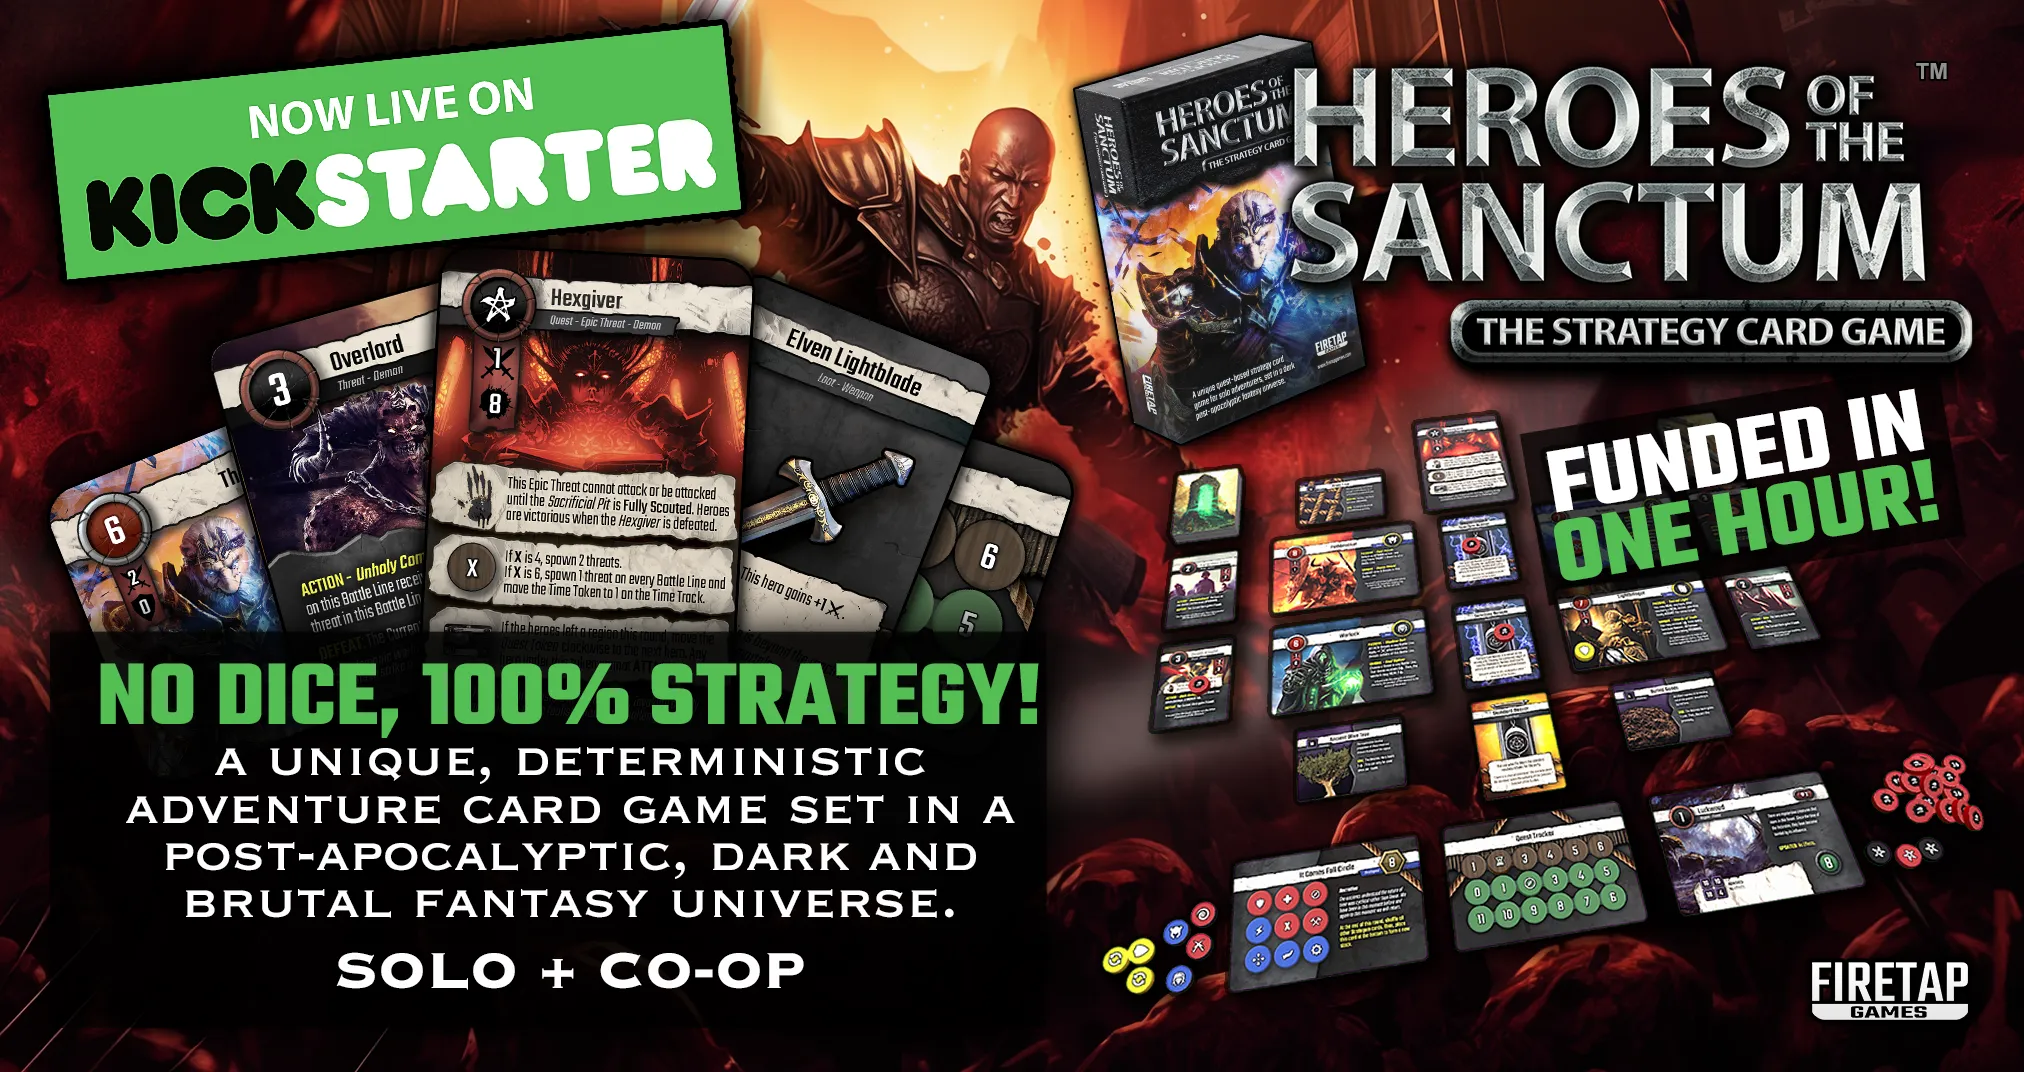 Heroes of the Sanctum Is Live And Funded In An Hour!